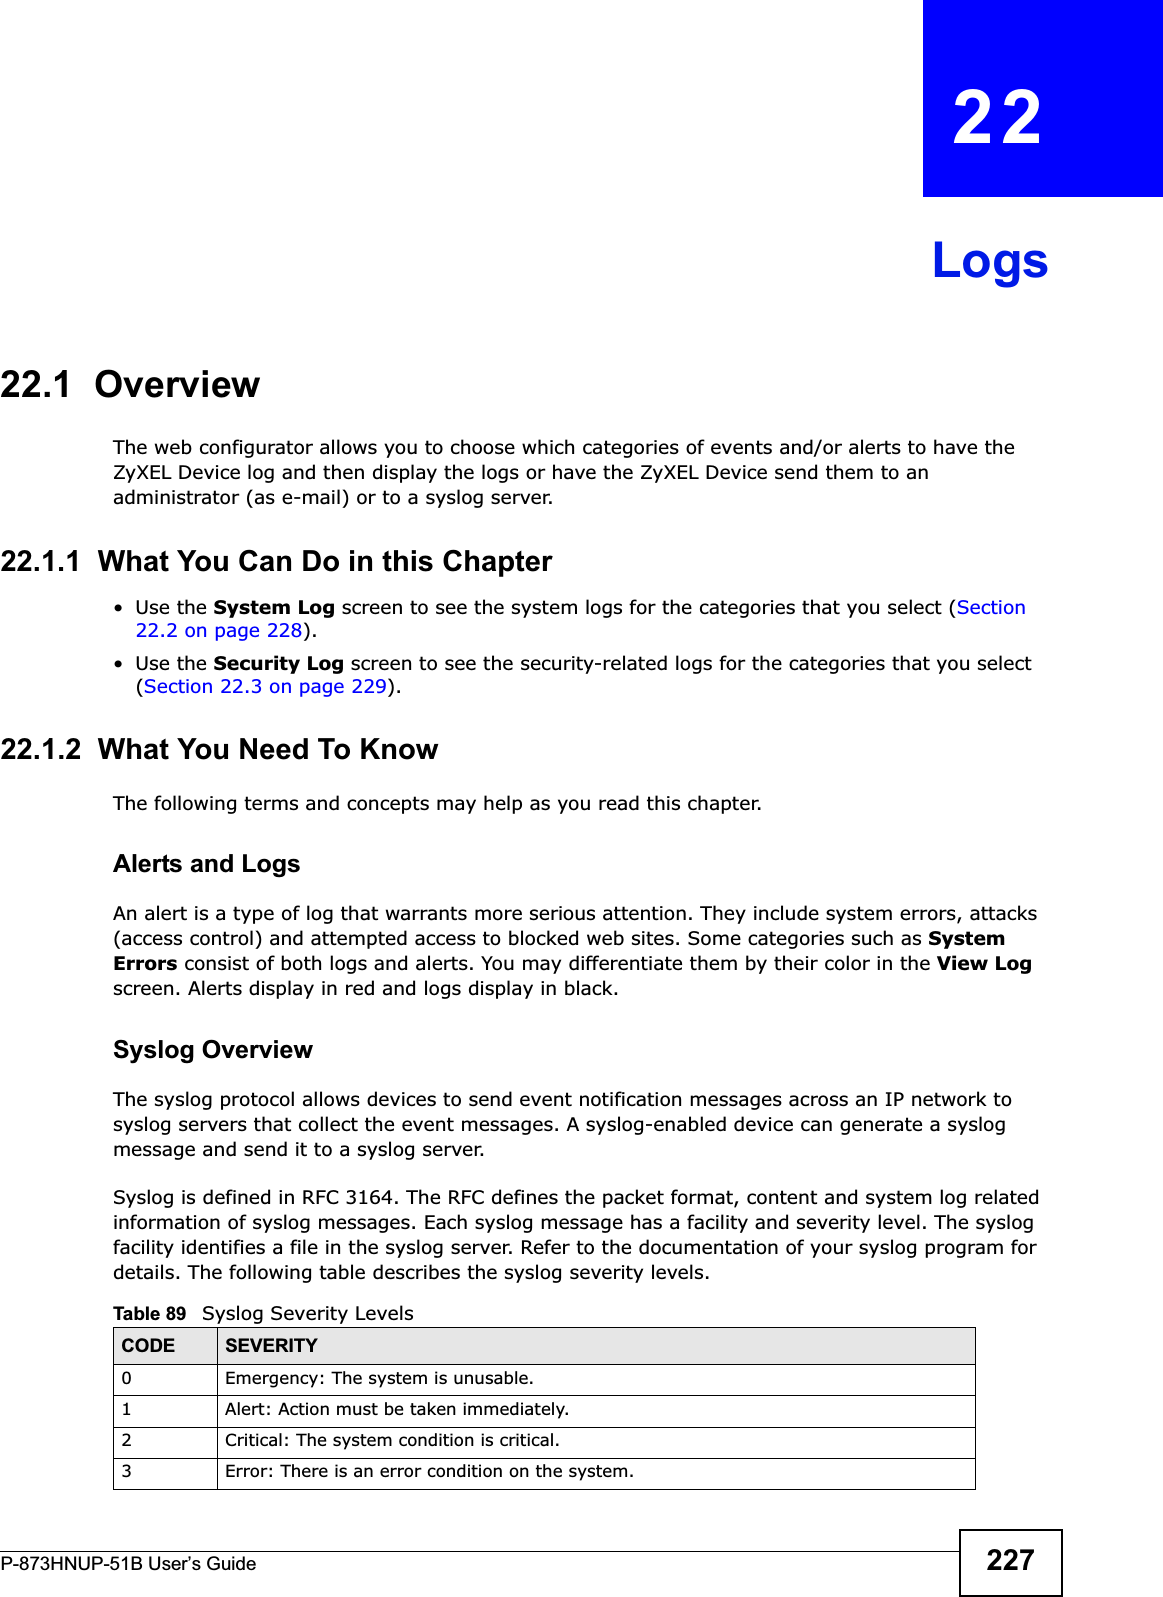 P-873HNUP-51B User’s Guide 227CHAPTER   22Logs22.1  OverviewThe web configurator allows you to choose which categories of events and/or alerts to have the ZyXEL Device log and then display the logs or have the ZyXEL Device send them to an administrator (as e-mail) or to a syslog server. 22.1.1  What You Can Do in this Chapter•Use the System Log screen to see the system logs for the categories that you select (Section 22.2 on page 228).•Use the Security Log screen to see the security-related logs for the categories that you select (Section 22.3 on page 229).22.1.2  What You Need To KnowThe following terms and concepts may help as you read this chapter.Alerts and LogsAn alert is a type of log that warrants more serious attention. They include system errors, attacks (access control) and attempted access to blocked web sites. Some categories such as System Errors consist of both logs and alerts. You may differentiate them by their color in the View Log screen. Alerts display in red and logs display in black.Syslog Overview The syslog protocol allows devices to send event notification messages across an IP network to syslog servers that collect the event messages. A syslog-enabled device can generate a syslog message and send it to a syslog server.Syslog is defined in RFC 3164. The RFC defines the packet format, content and system log related information of syslog messages. Each syslog message has a facility and severity level. The syslog facility identifies a file in the syslog server. Refer to the documentation of your syslog program for details. The following table describes the syslog severity levels. Table 89   Syslog Severity LevelsCODE SEVERITY0 Emergency: The system is unusable.1 Alert: Action must be taken immediately.2 Critical: The system condition is critical.3 Error: There is an error condition on the system.